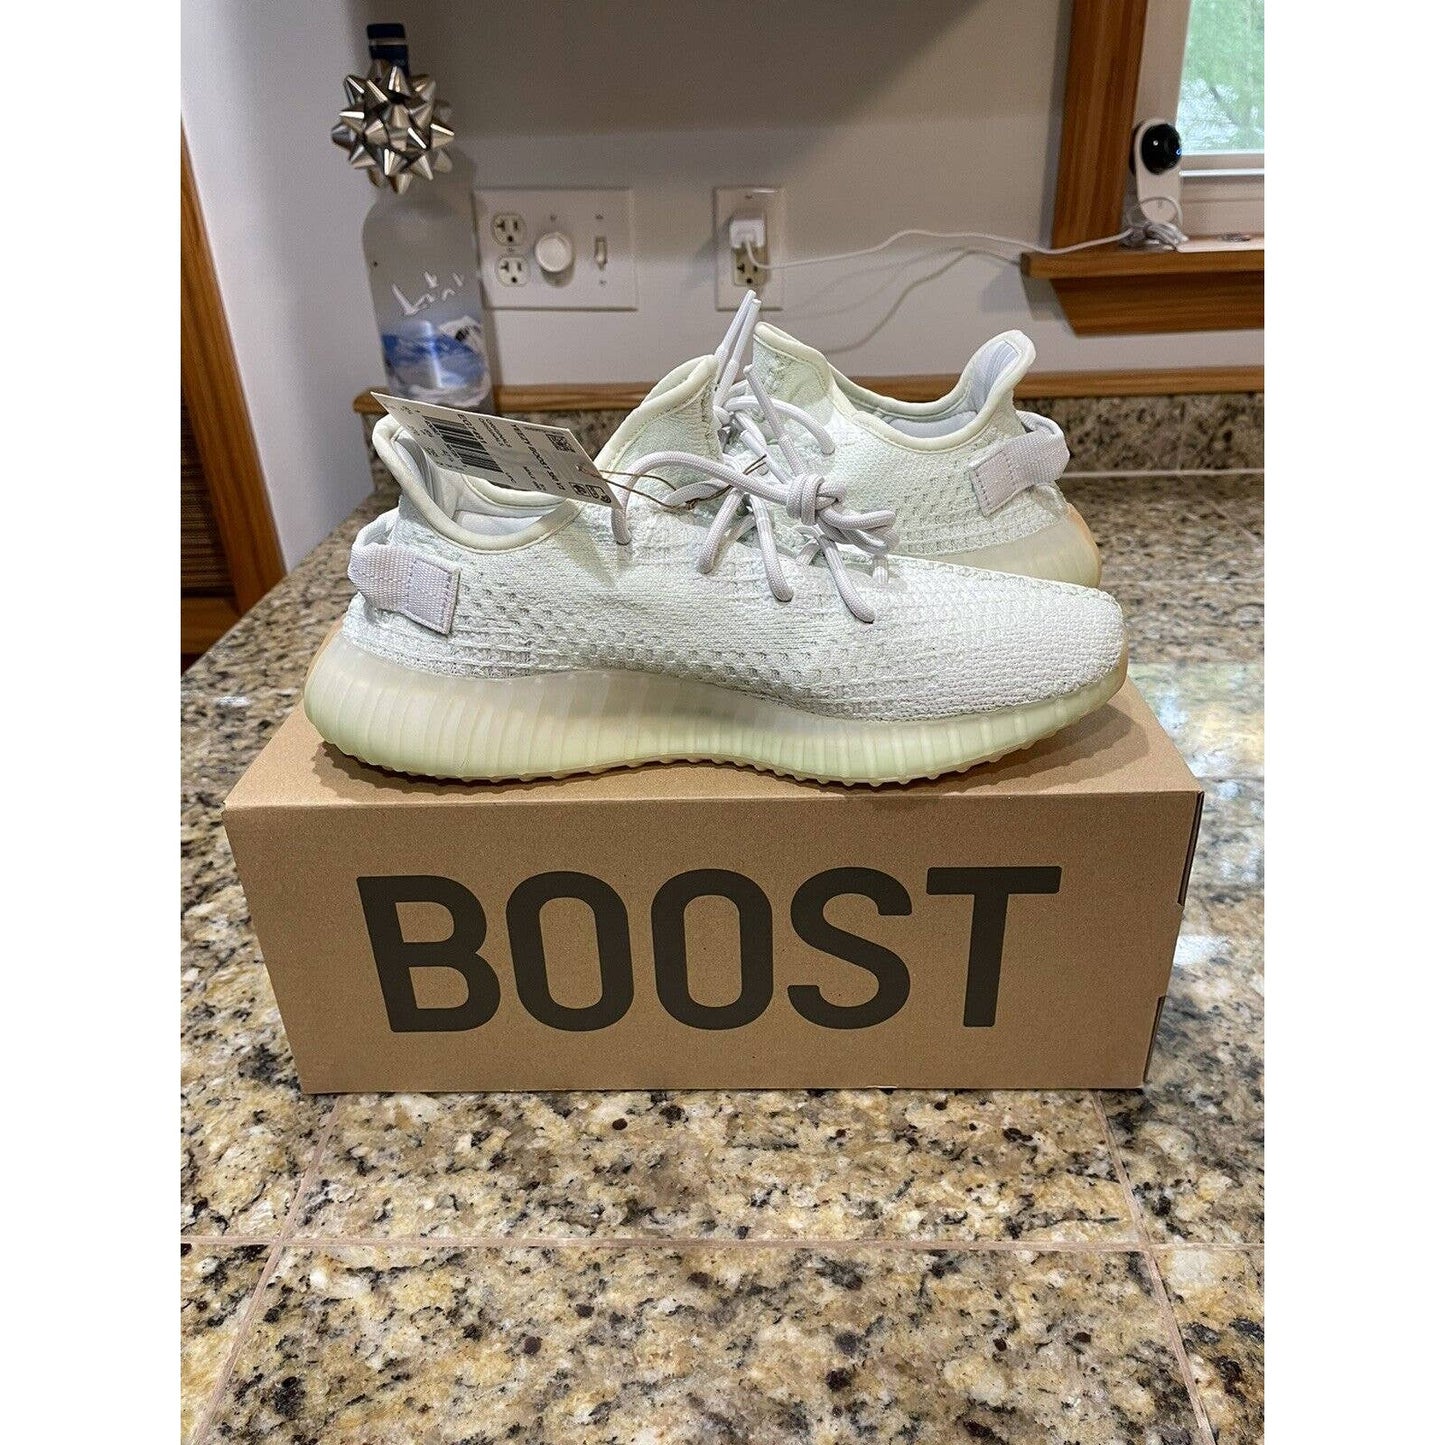 DS Adidas Yeezy 350 v2 Hyperspace Men’s Size 9 *SHIPS FAST*